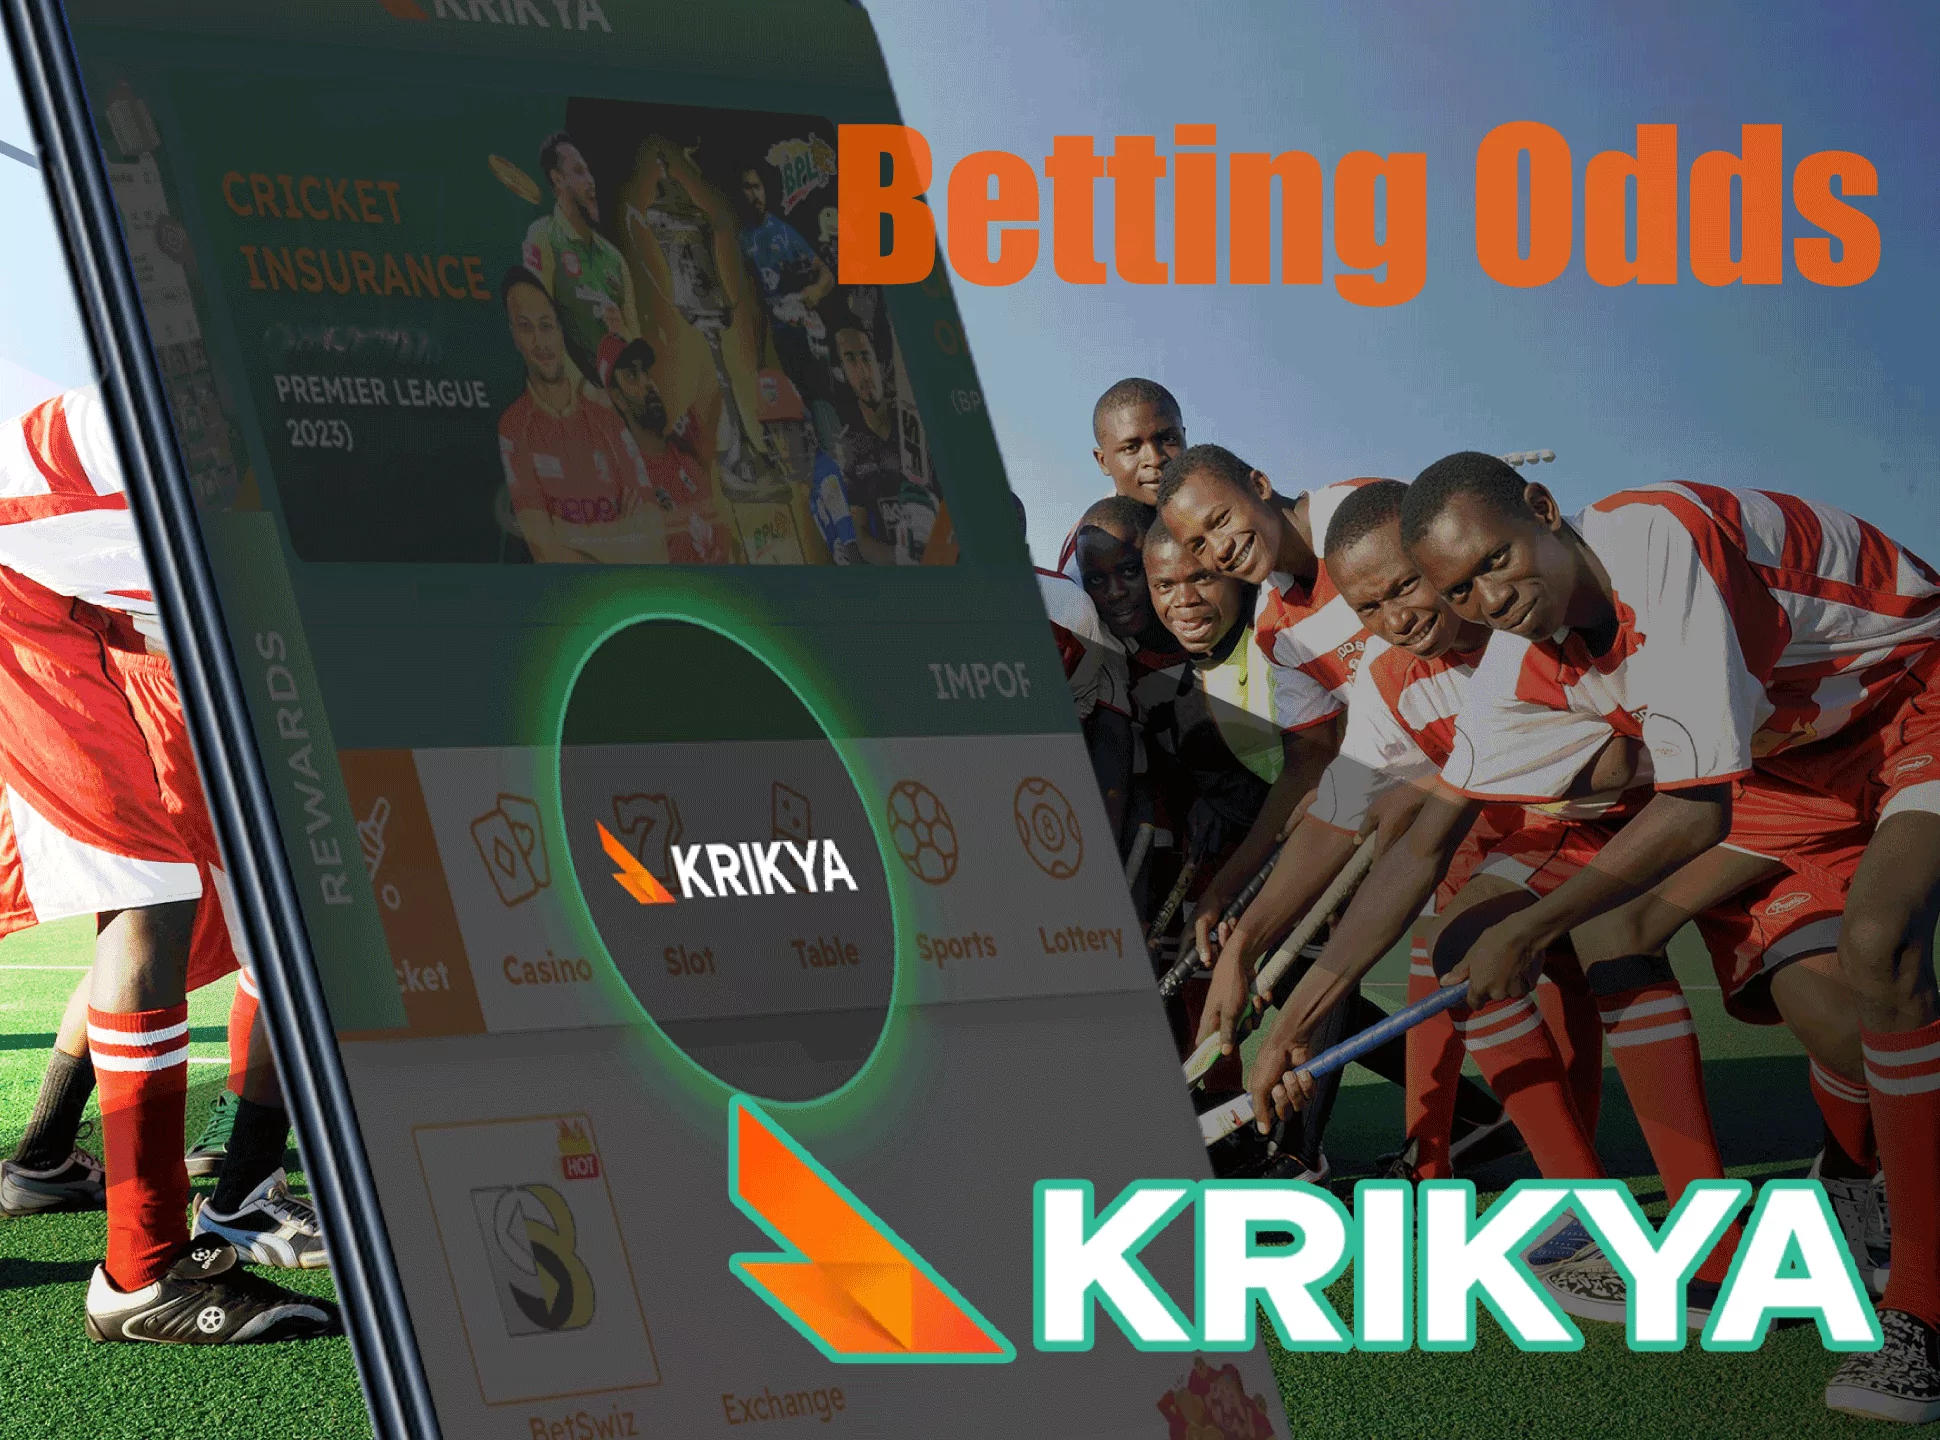 Krikya offers the greatest odds for every sport.